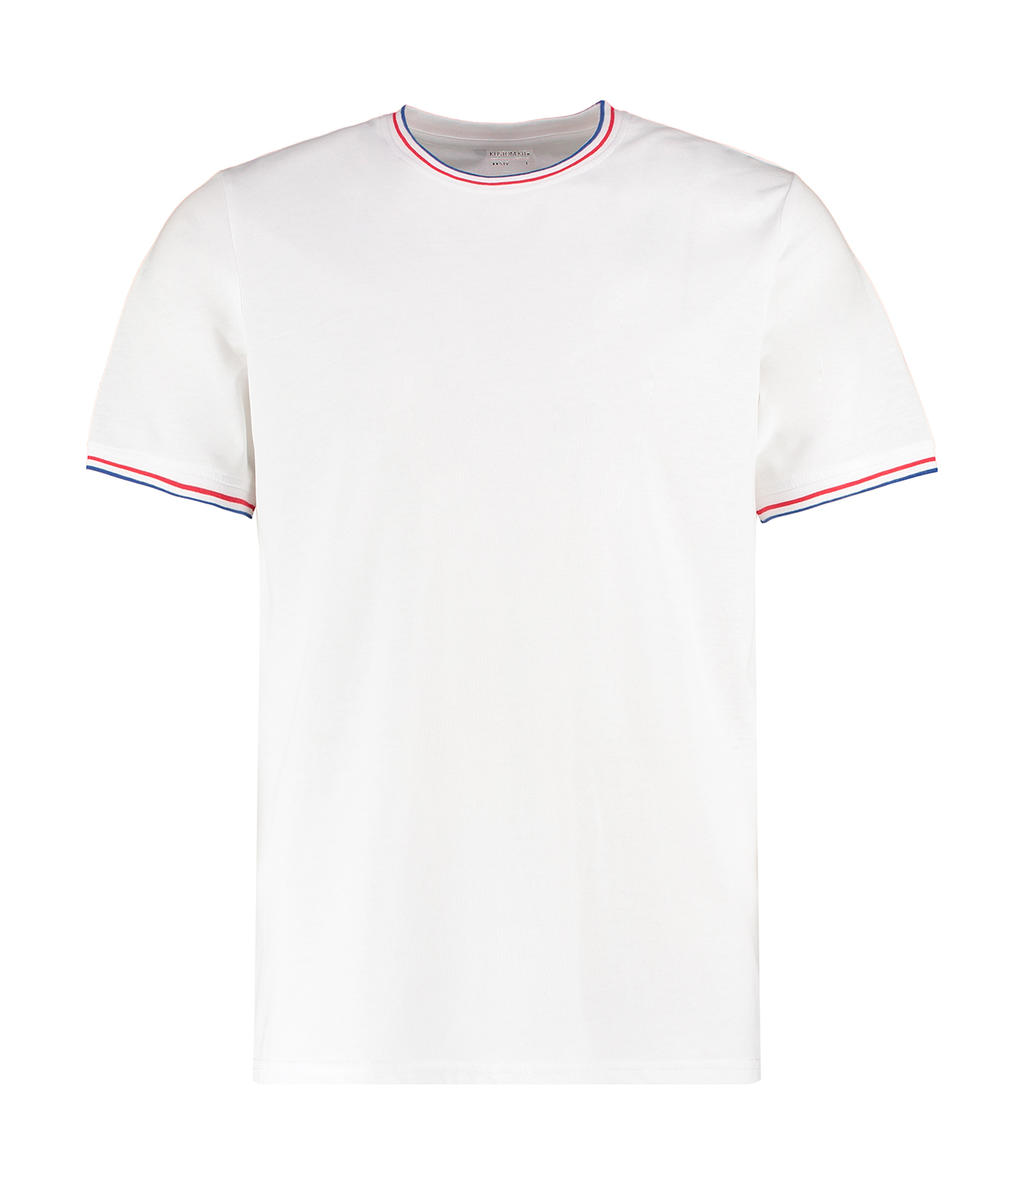  Fashion Fit Tipped Tee in Farbe White/Red/Royal